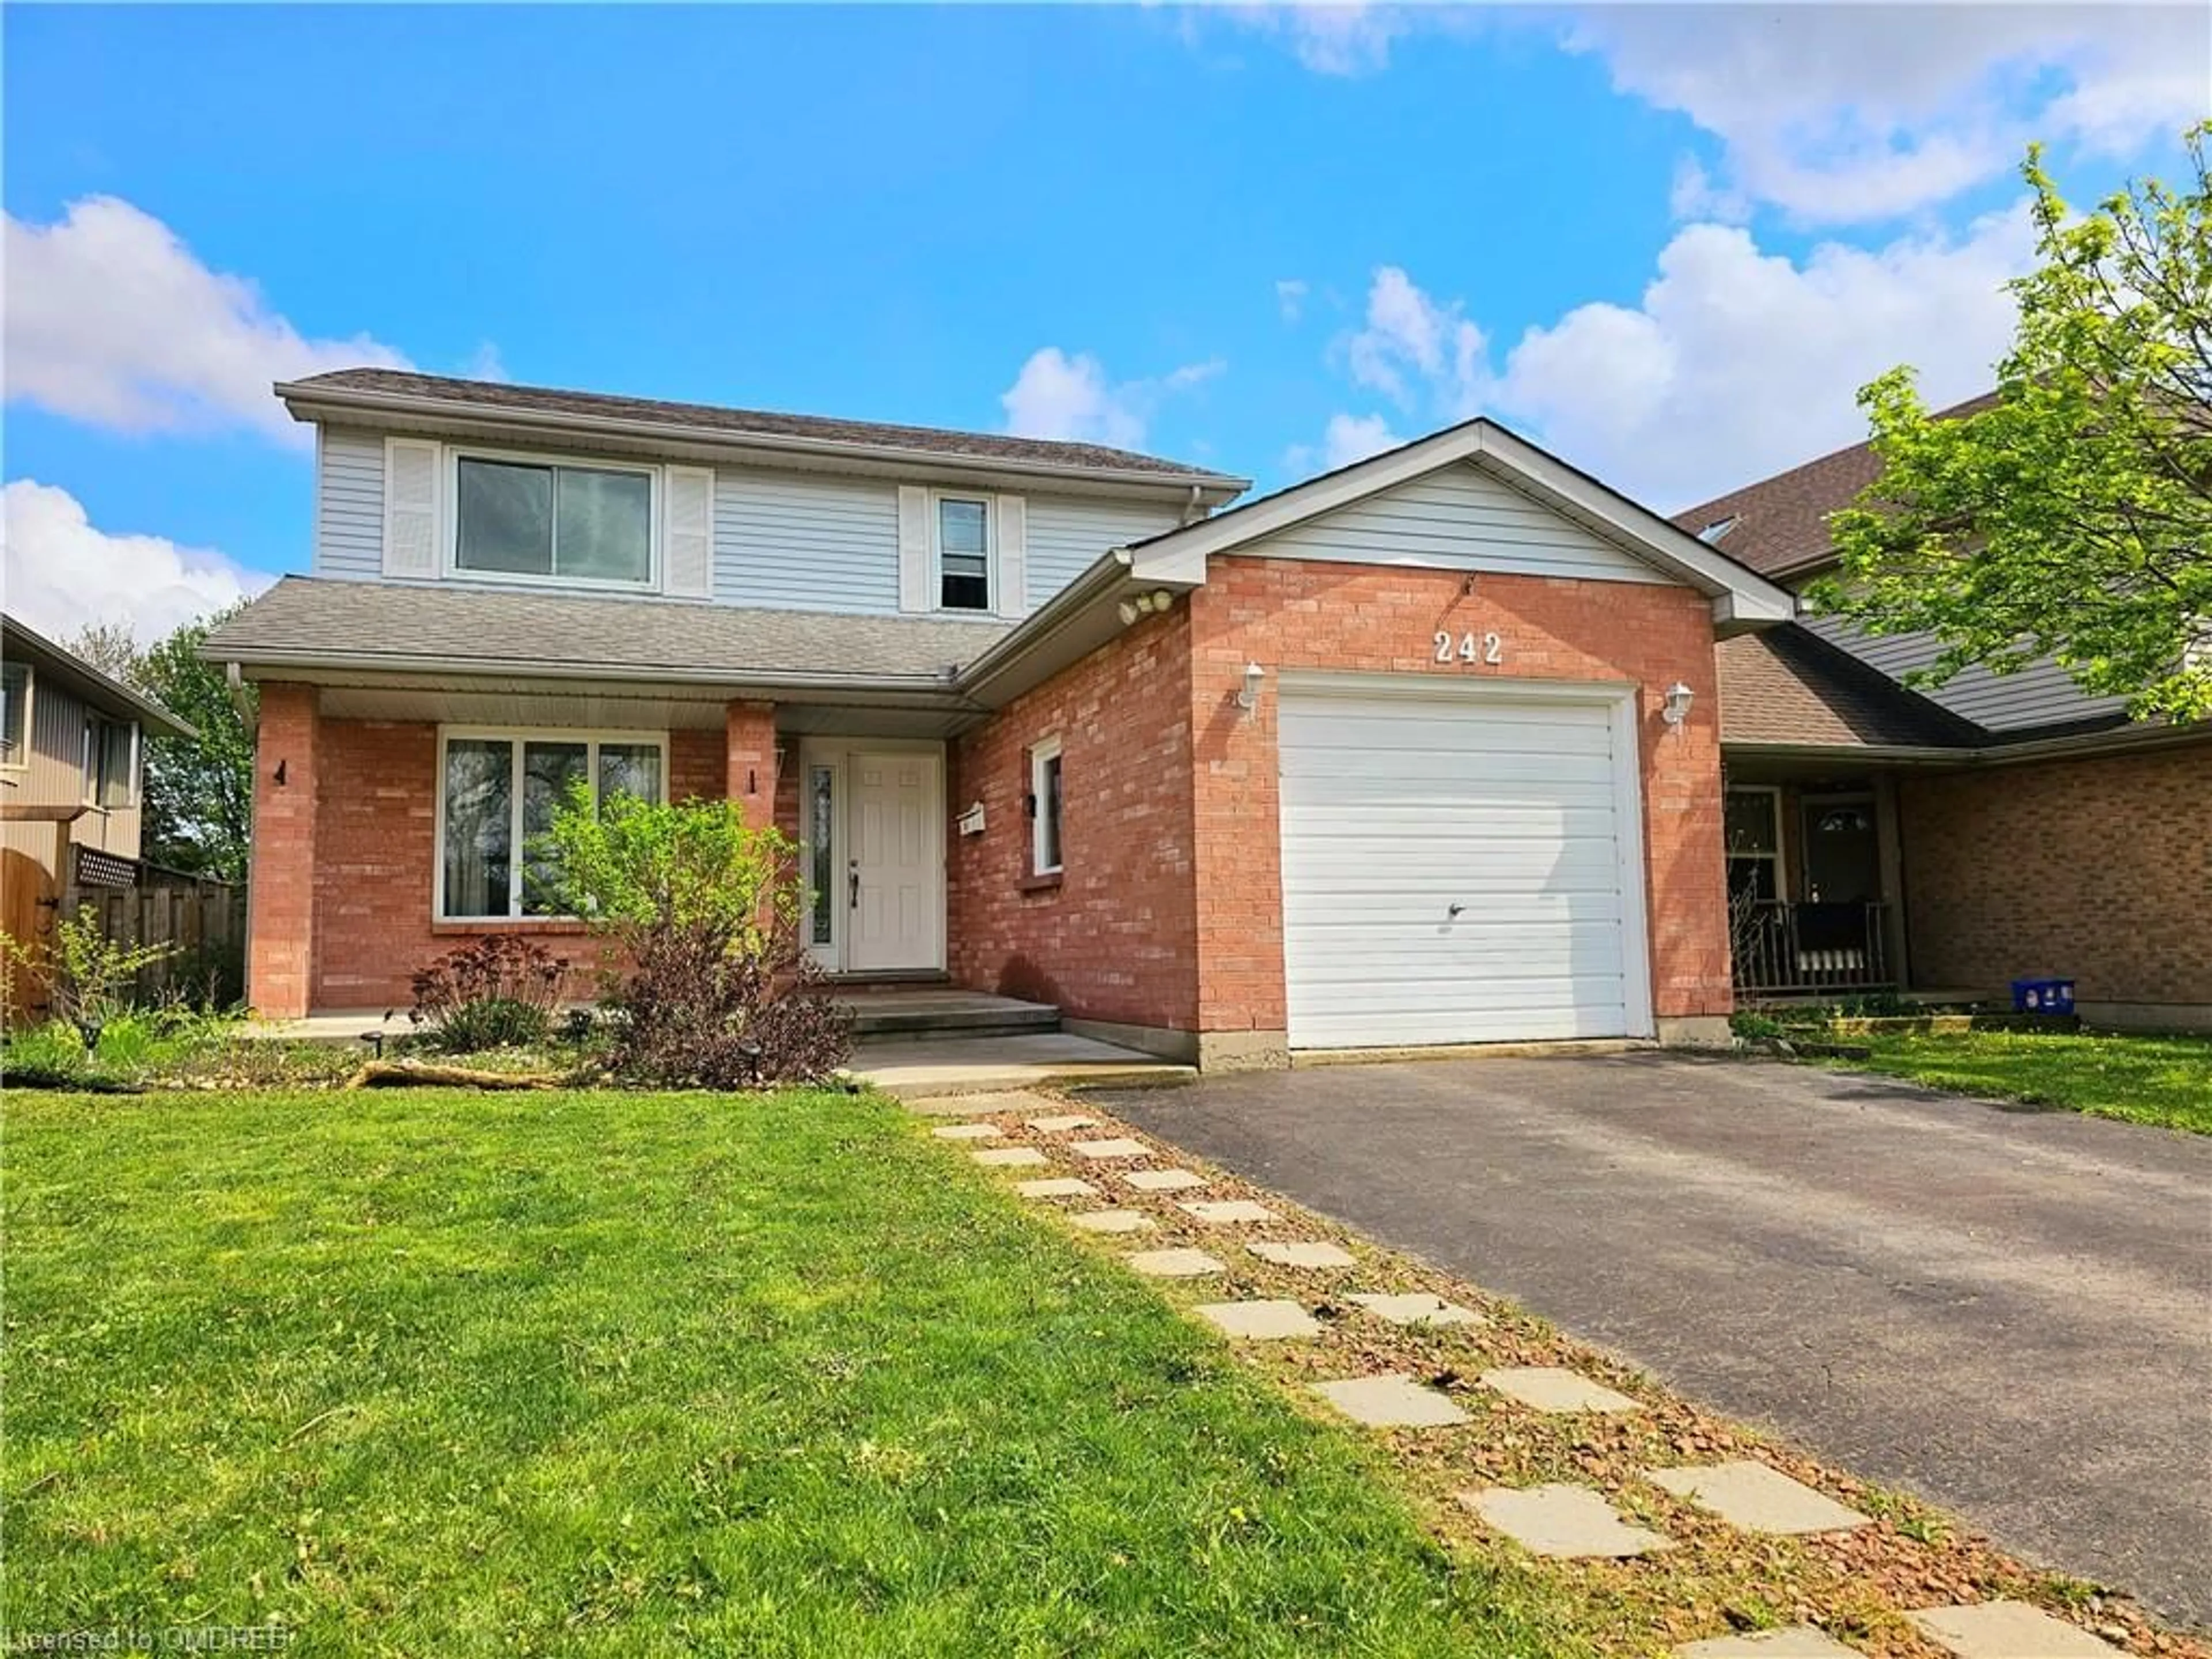 Home with brick exterior material for 242 Colette Dr, London Ontario N6E 3S8